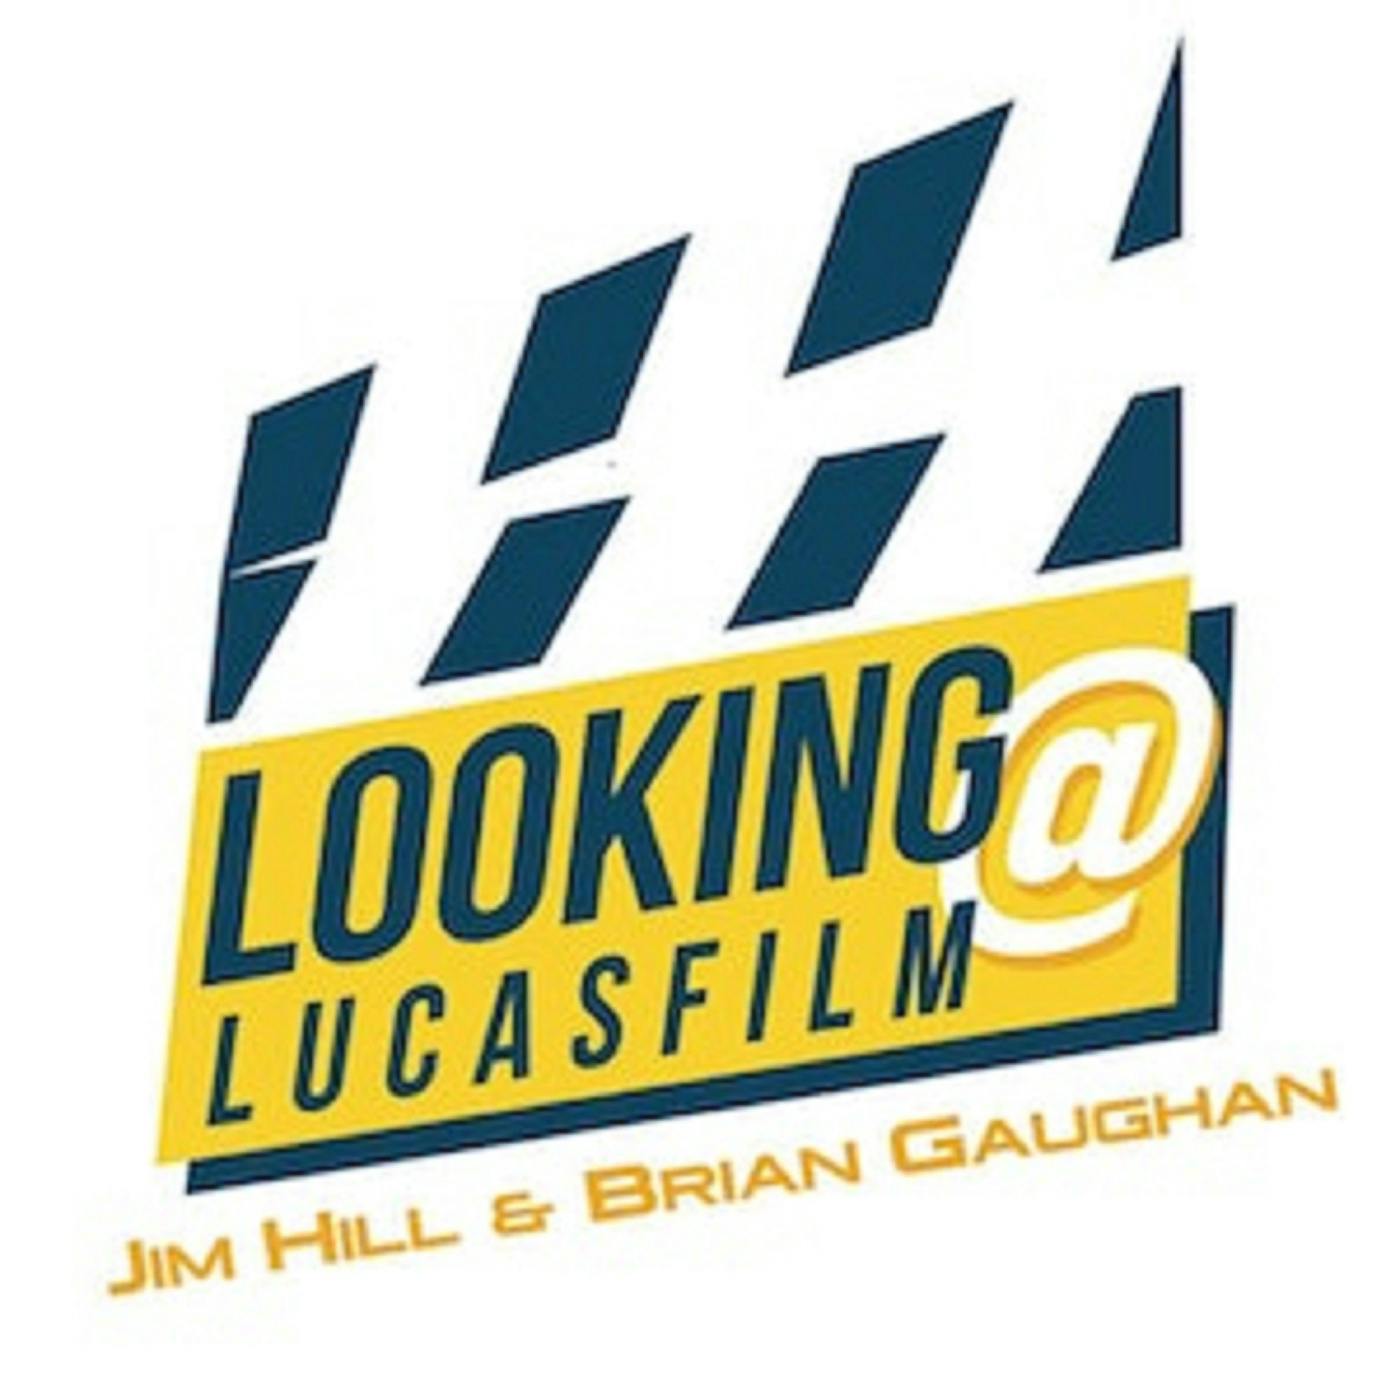 Looking at Lucasfilm with Brian Gaughan - Episode 84: “Ahsoka” continues the “Star Wars” story that started with “Rebels”